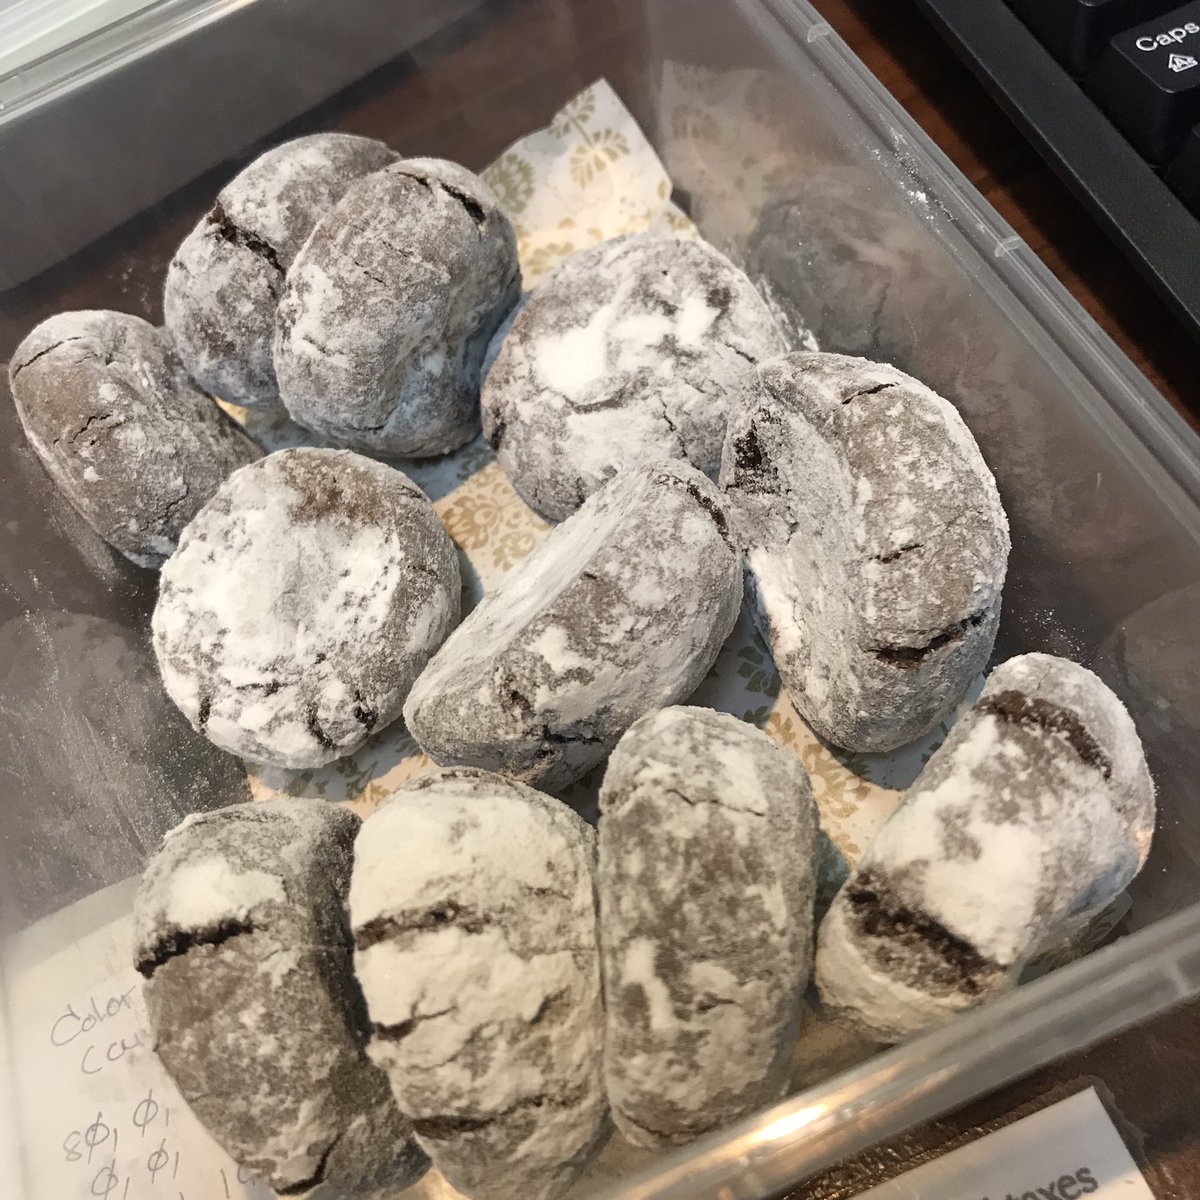 Chewy crinkles via Cowrie Grill (Php131 for 12 pcs) (10/10)

#foodamnph #foodamn #foodamnphilippines 
#eatwithyoureyes #worklunchbox #foodamnphilippinesworklunchbox  #manilahotellunch #manilahotelfoodies #deliconspiracy #cowriegrill #cowriegrillchocolatecrinkles #sanjuanfoodies